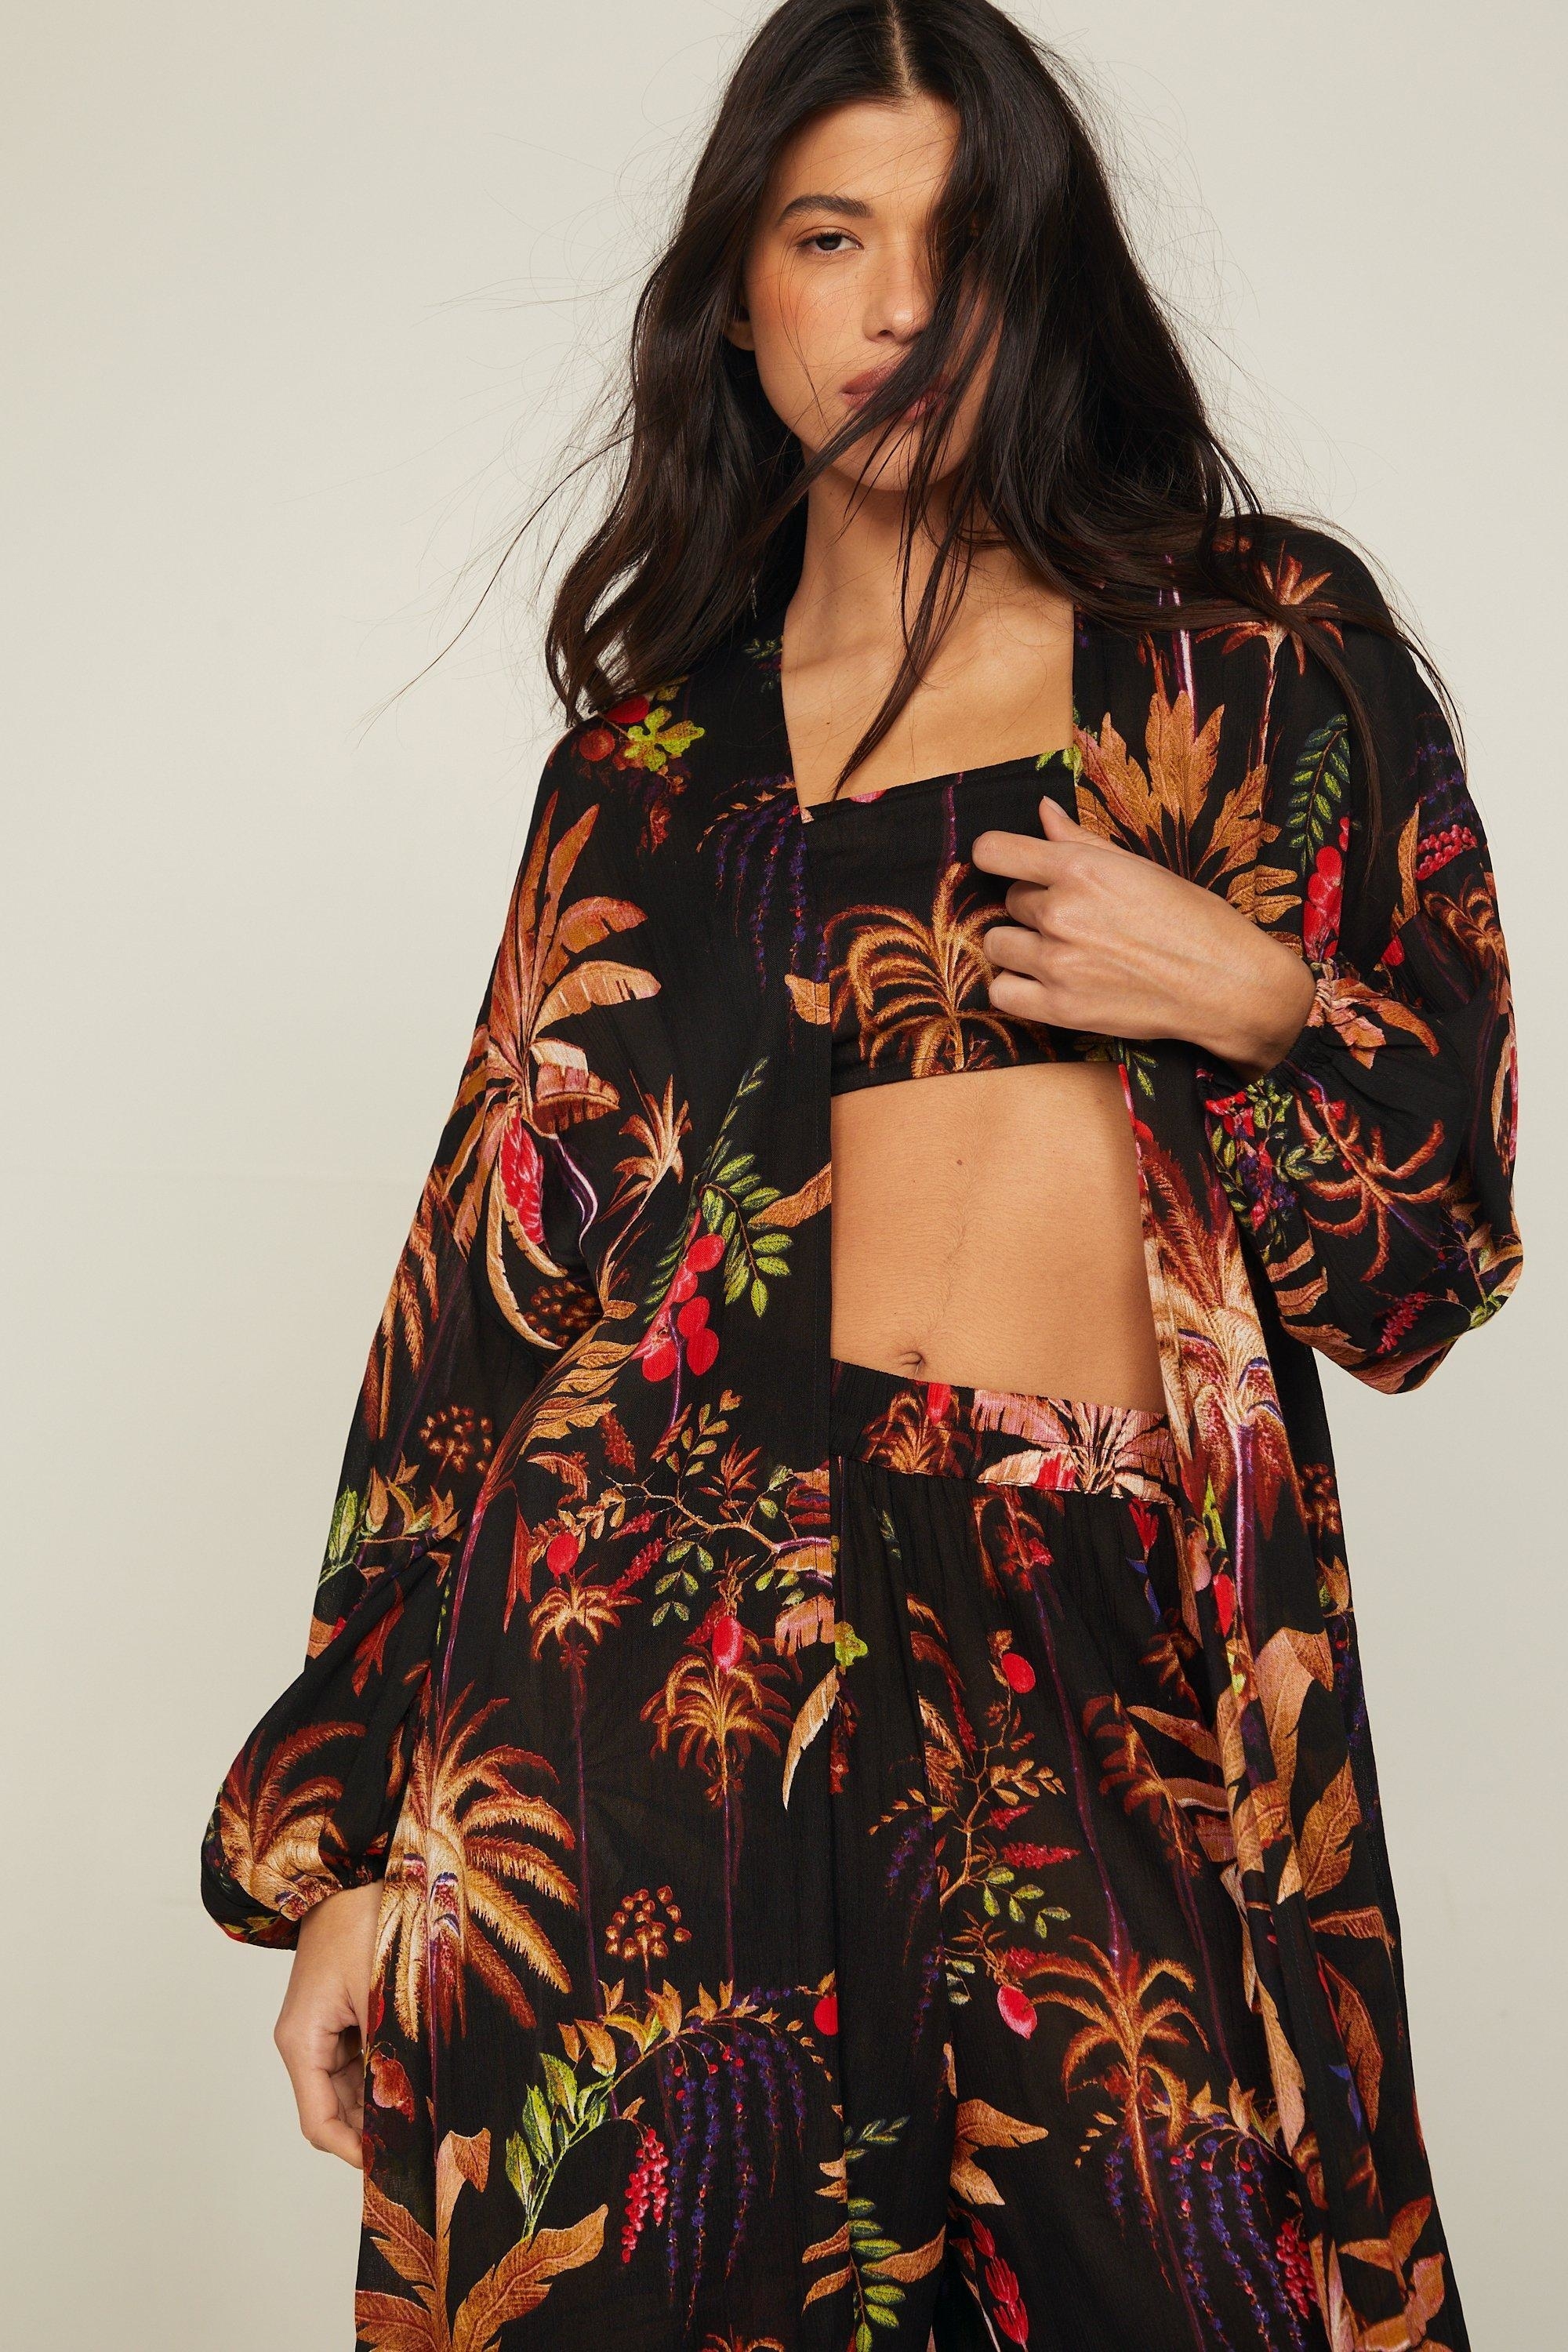 model in a tropical print three-piece outfit with midriff cutout